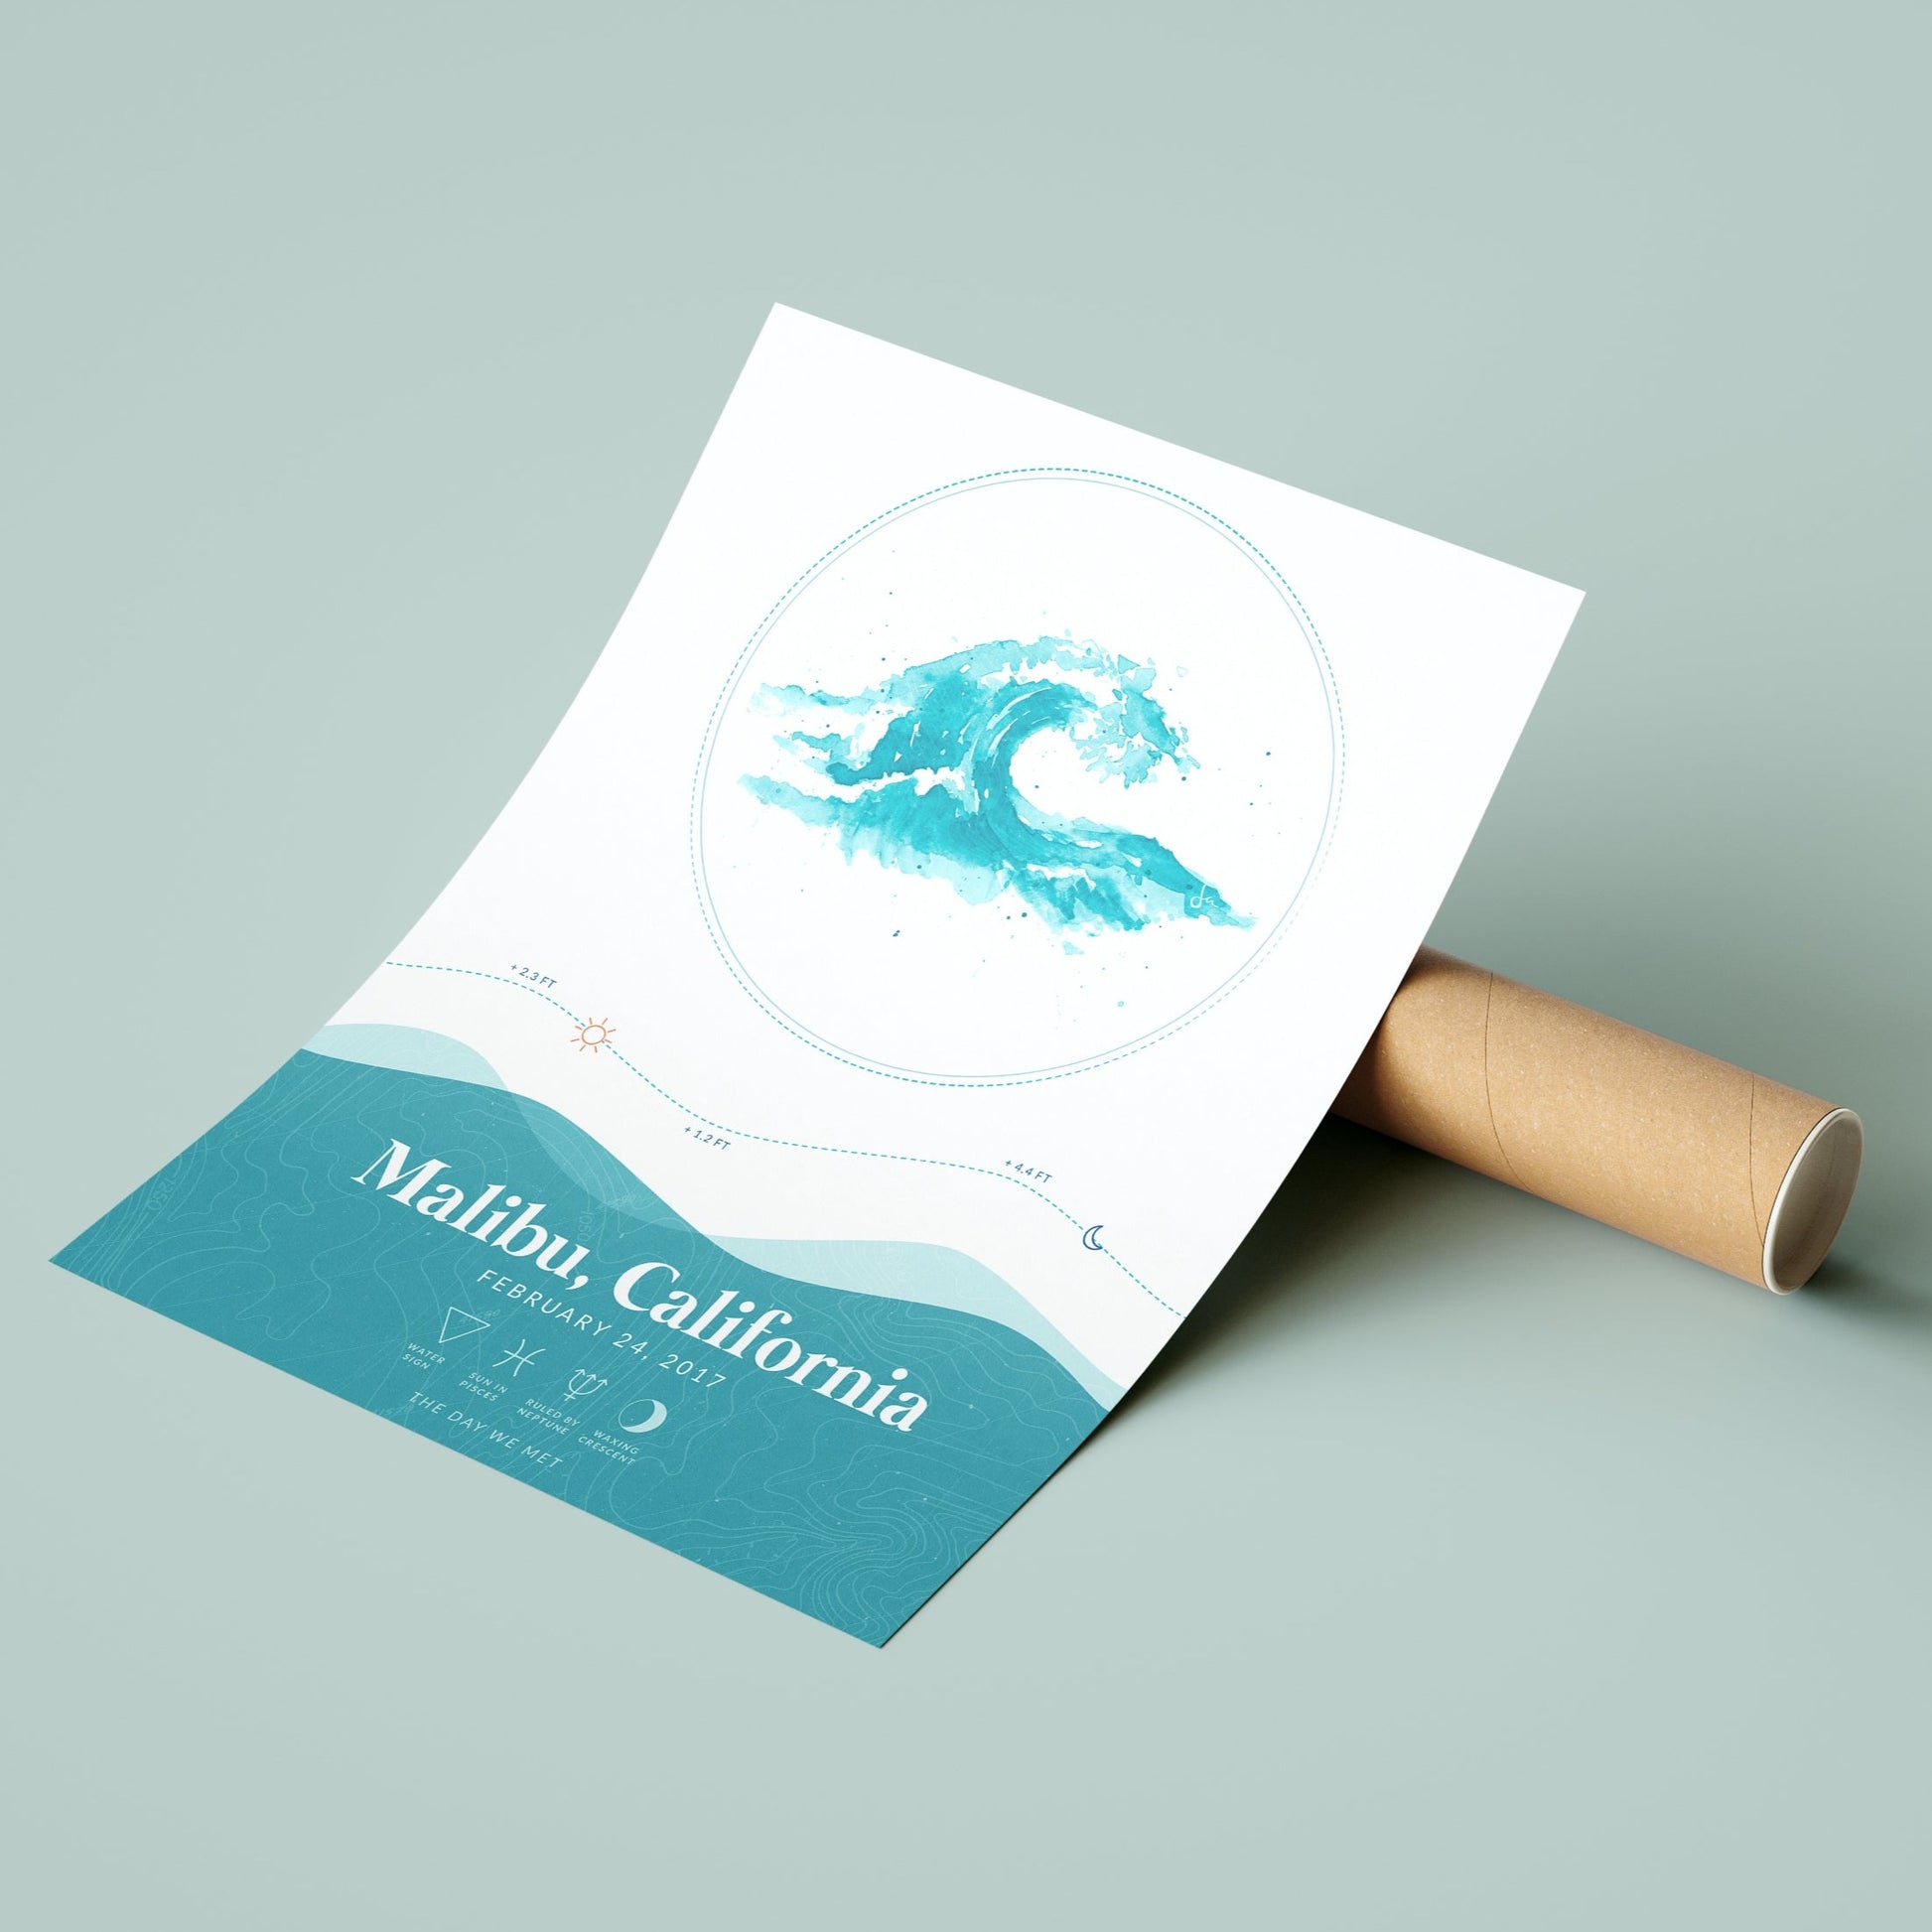 Waves Tide Map poster showing Malibu, California, next to eco-friendly packaging. Waves Tide Map Posters by Salt Atlas are custom posters showing the tide, astrology zodiac sign, and moon phase for a special day, like an anniversary or birthday.